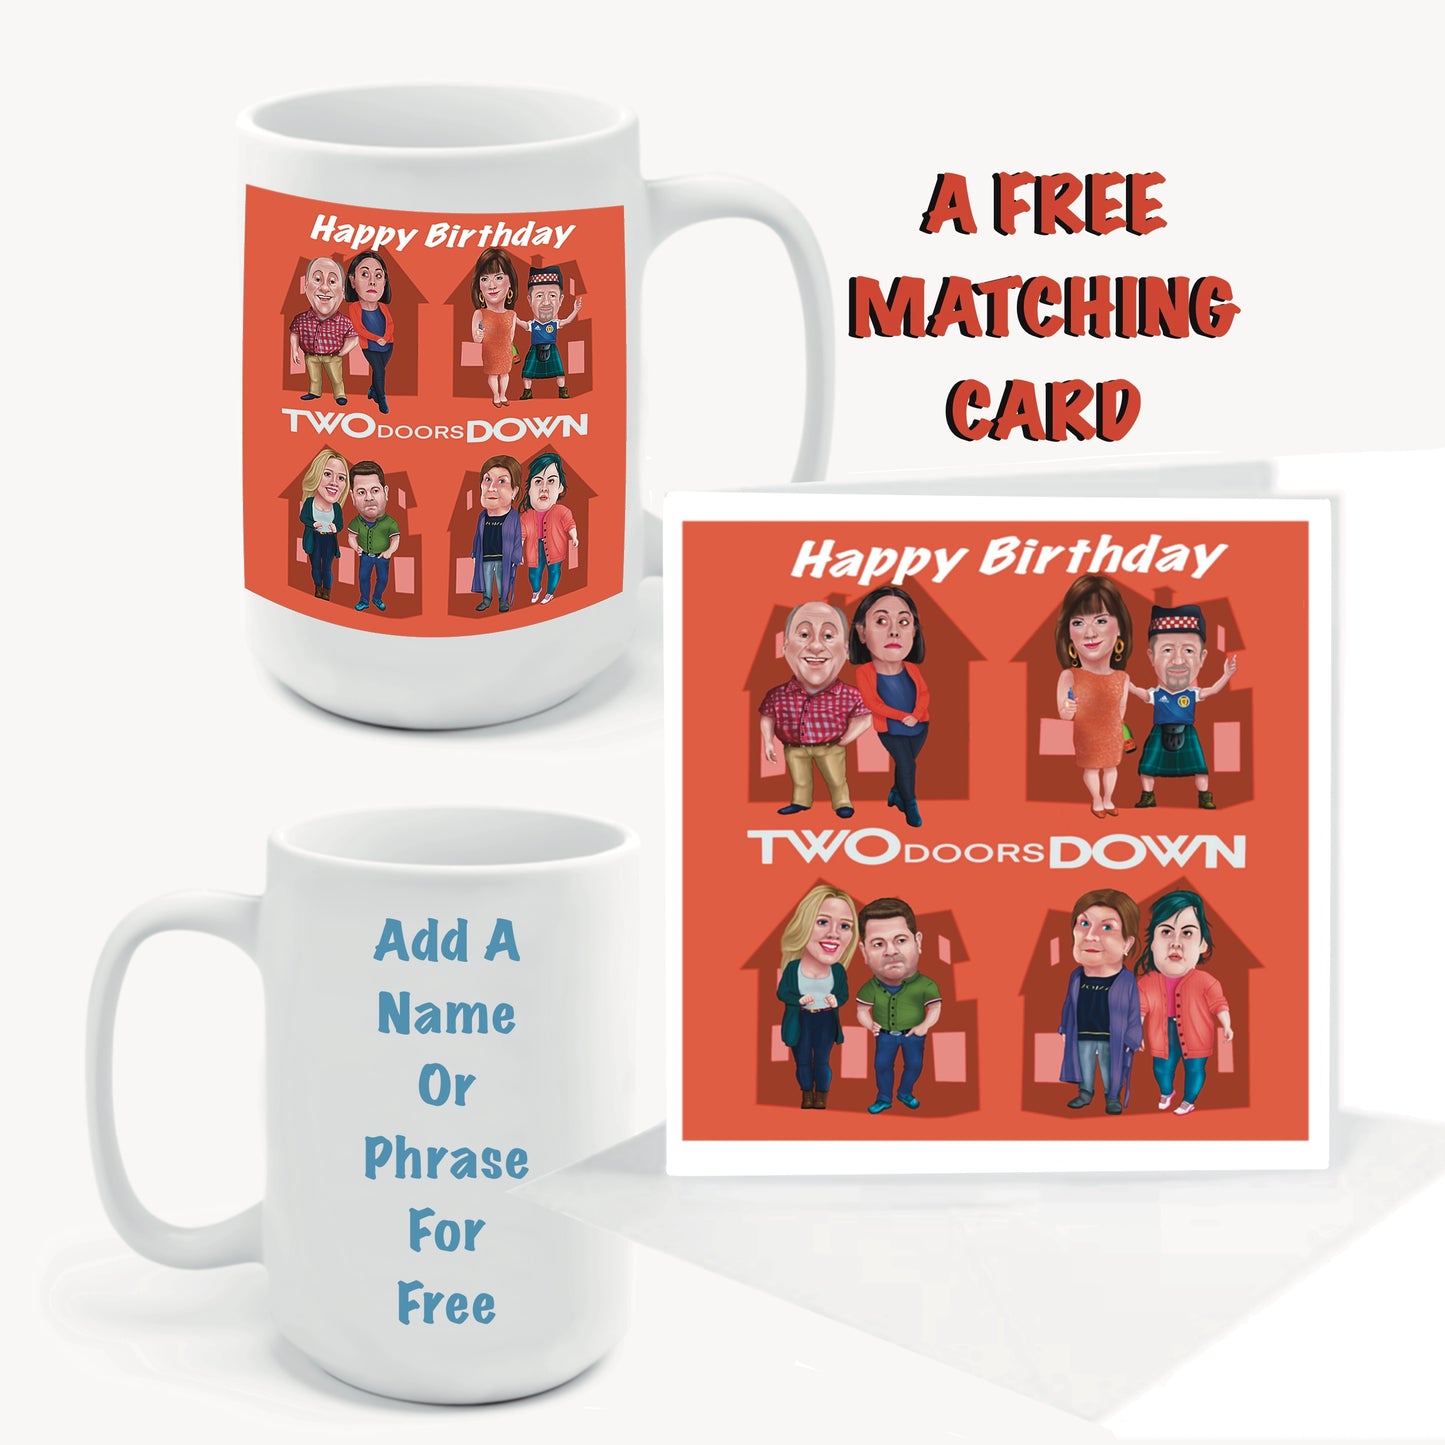 Two Doors Down Mugs-Mugs and FREE Cards-Cards red